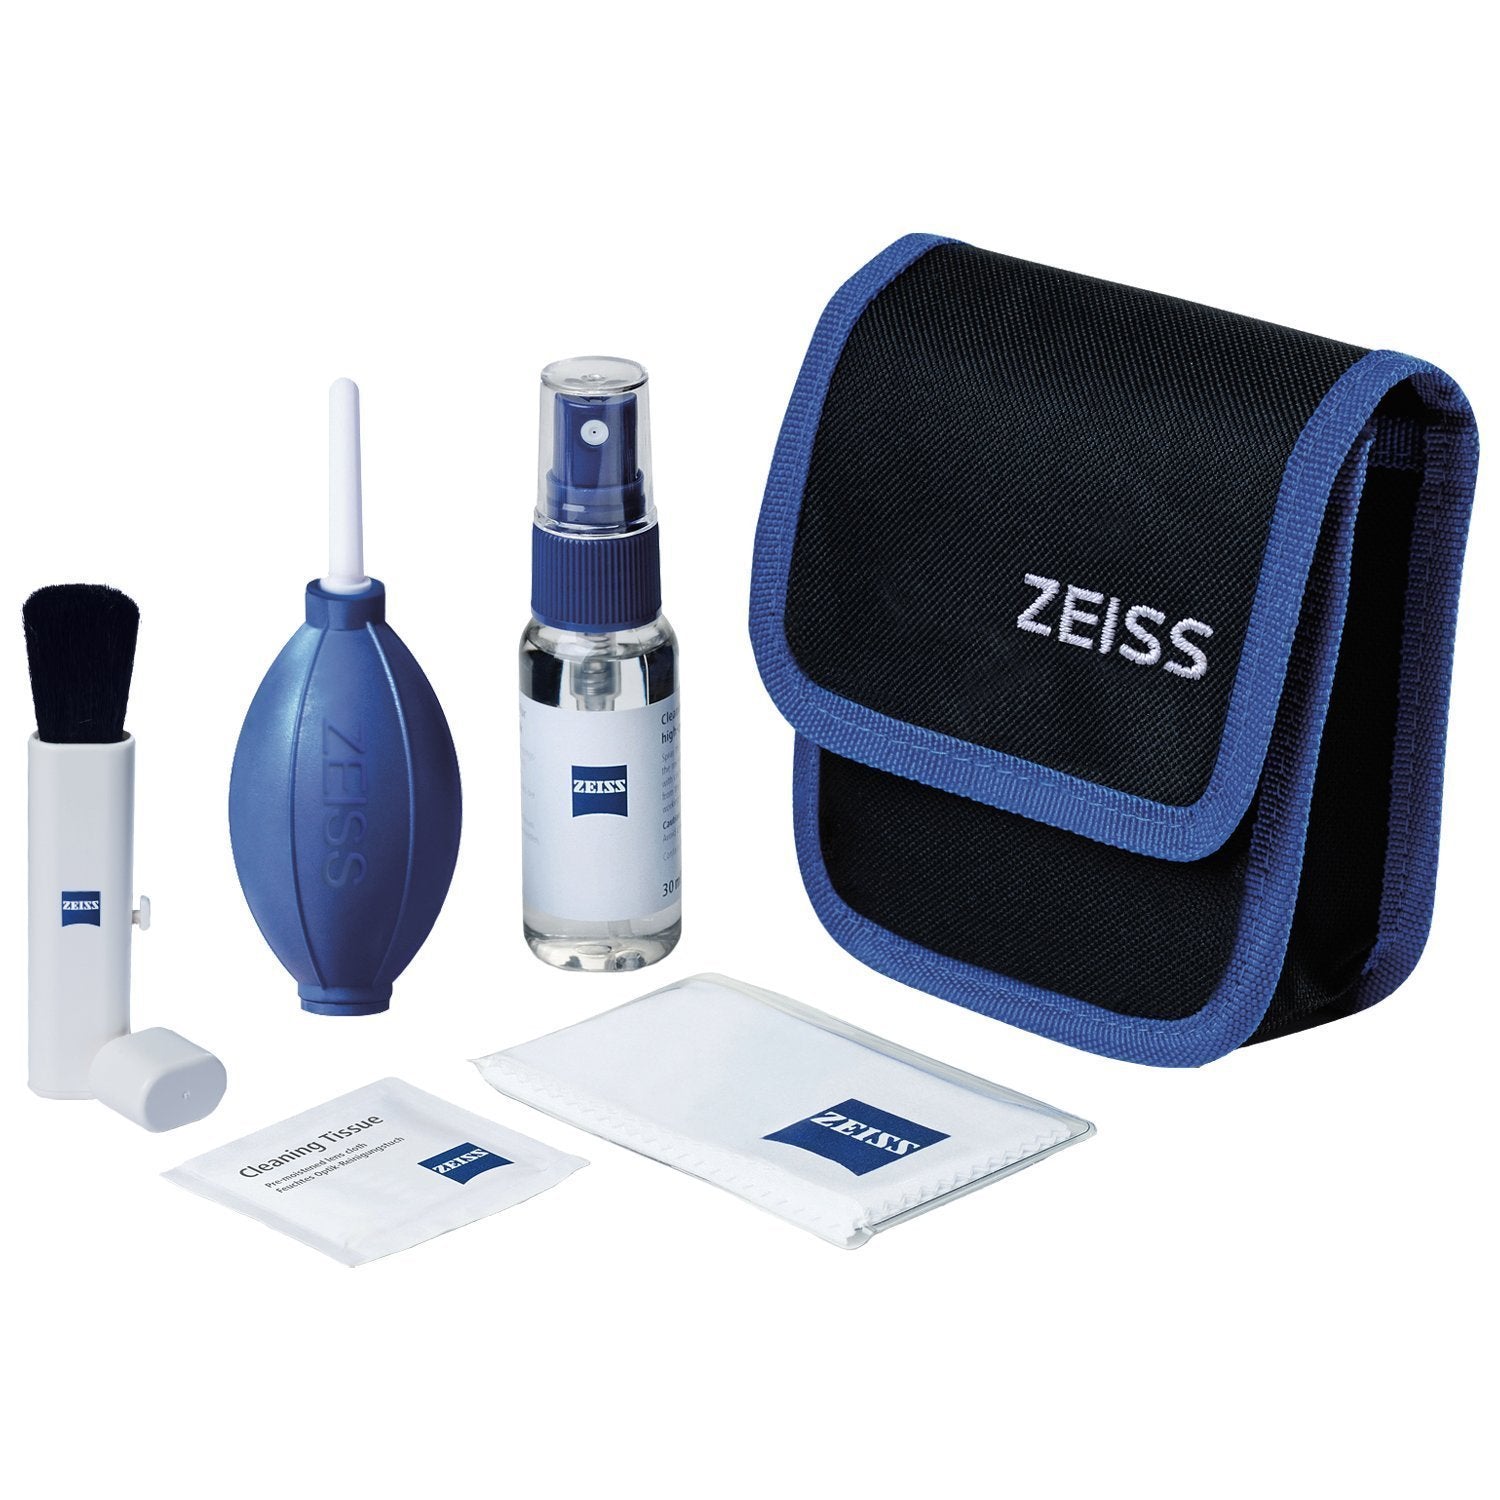 Accessories - Carl Zeiss Premium Lens Cleaning Kit